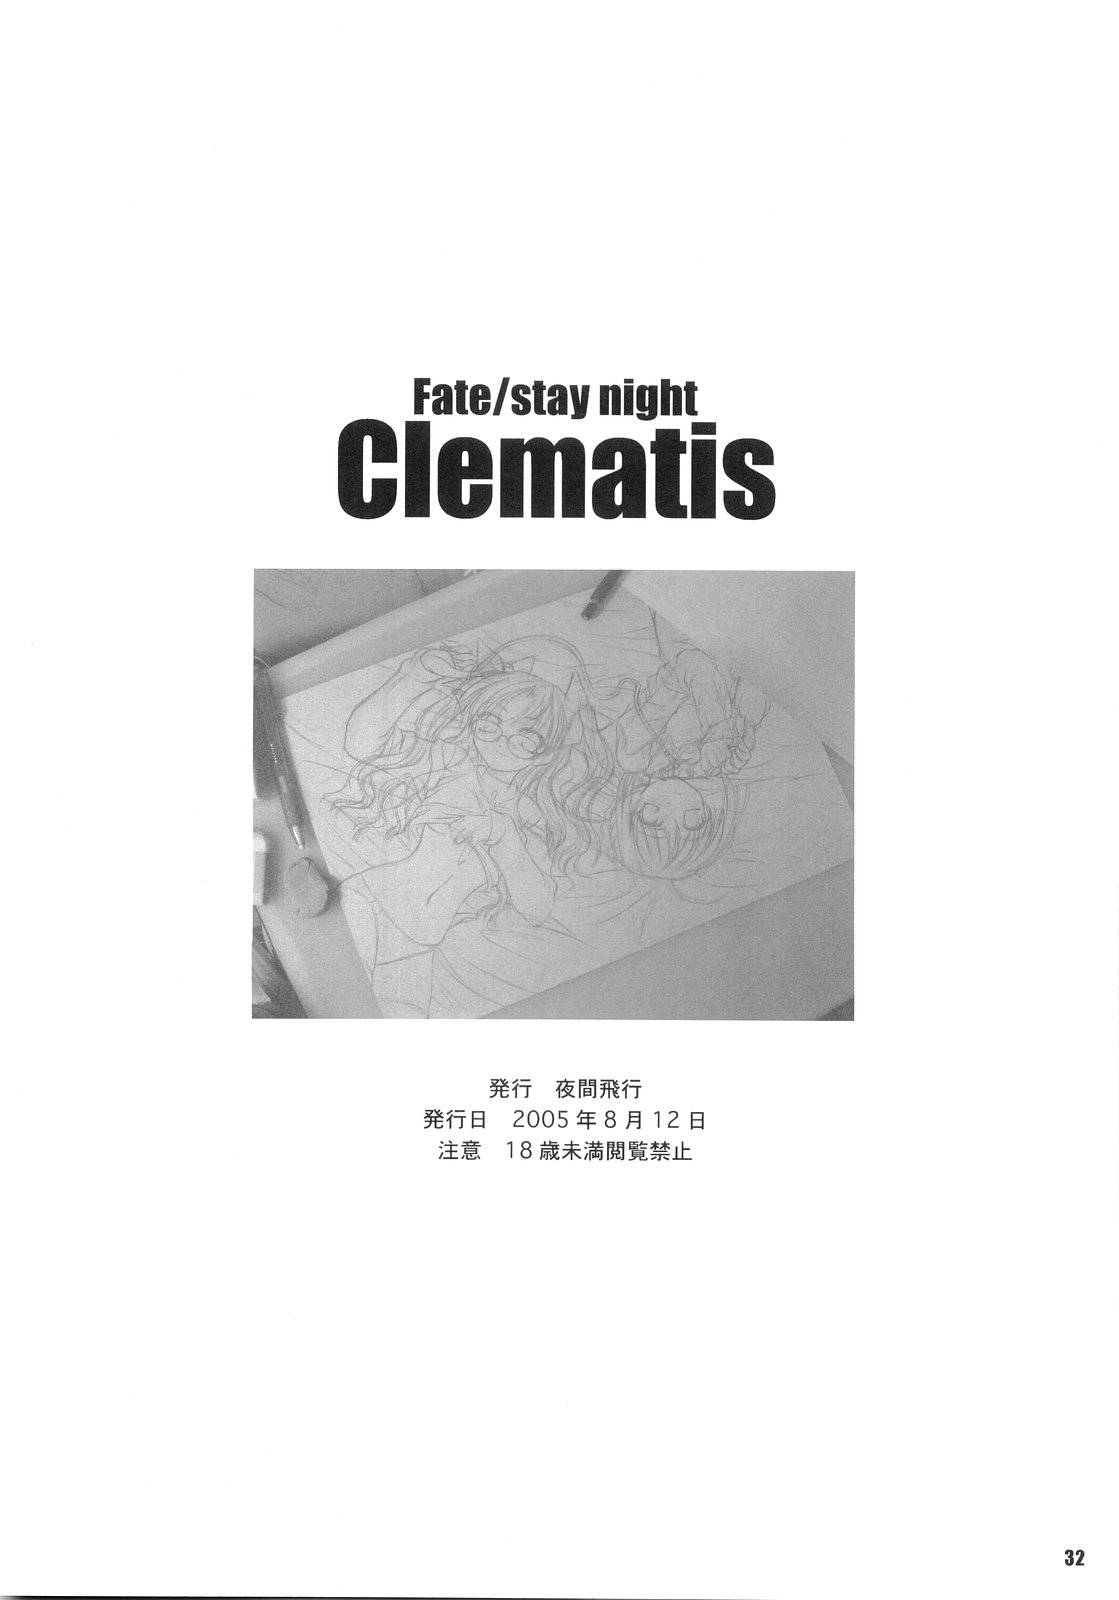 (C68) [Yakan Hikou (Inoue Tommy)] Clematis (Fate/stay night) page 31 full